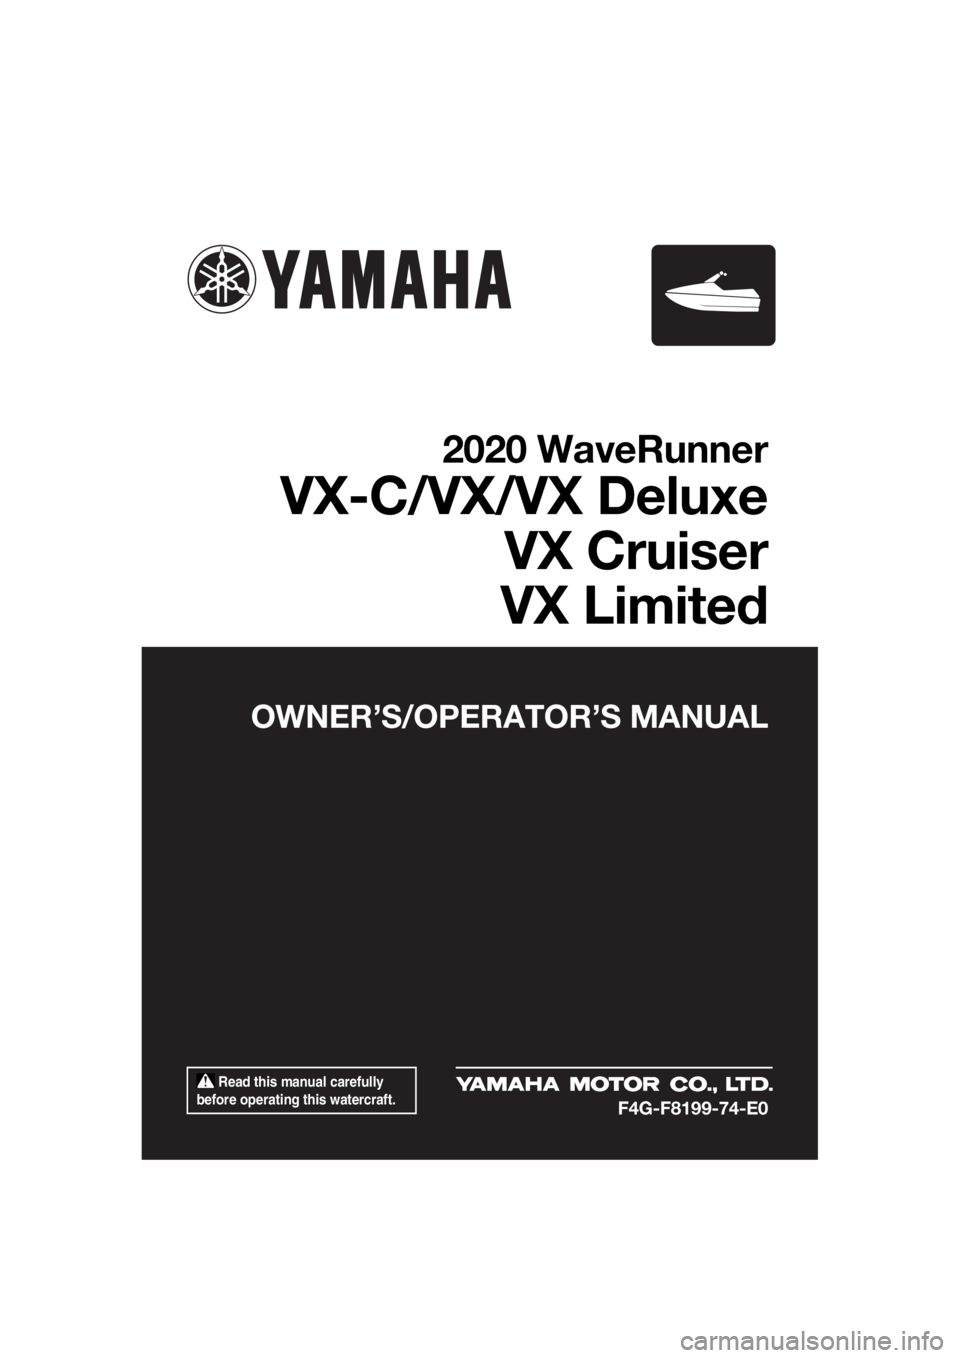 YAMAHA VX CRUISER 2020  Owners Manual  Read this manual carefully 
before operating this watercraft.
OWNER’S/OPERATOR’S MANUAL
2020 WaveRunner
VX-C/VX/VX Deluxe
VX Cruiser
VX Limited
F4G-F8199-74-E0
UF4G74E0.book  Page 1  Tuesday, Jul